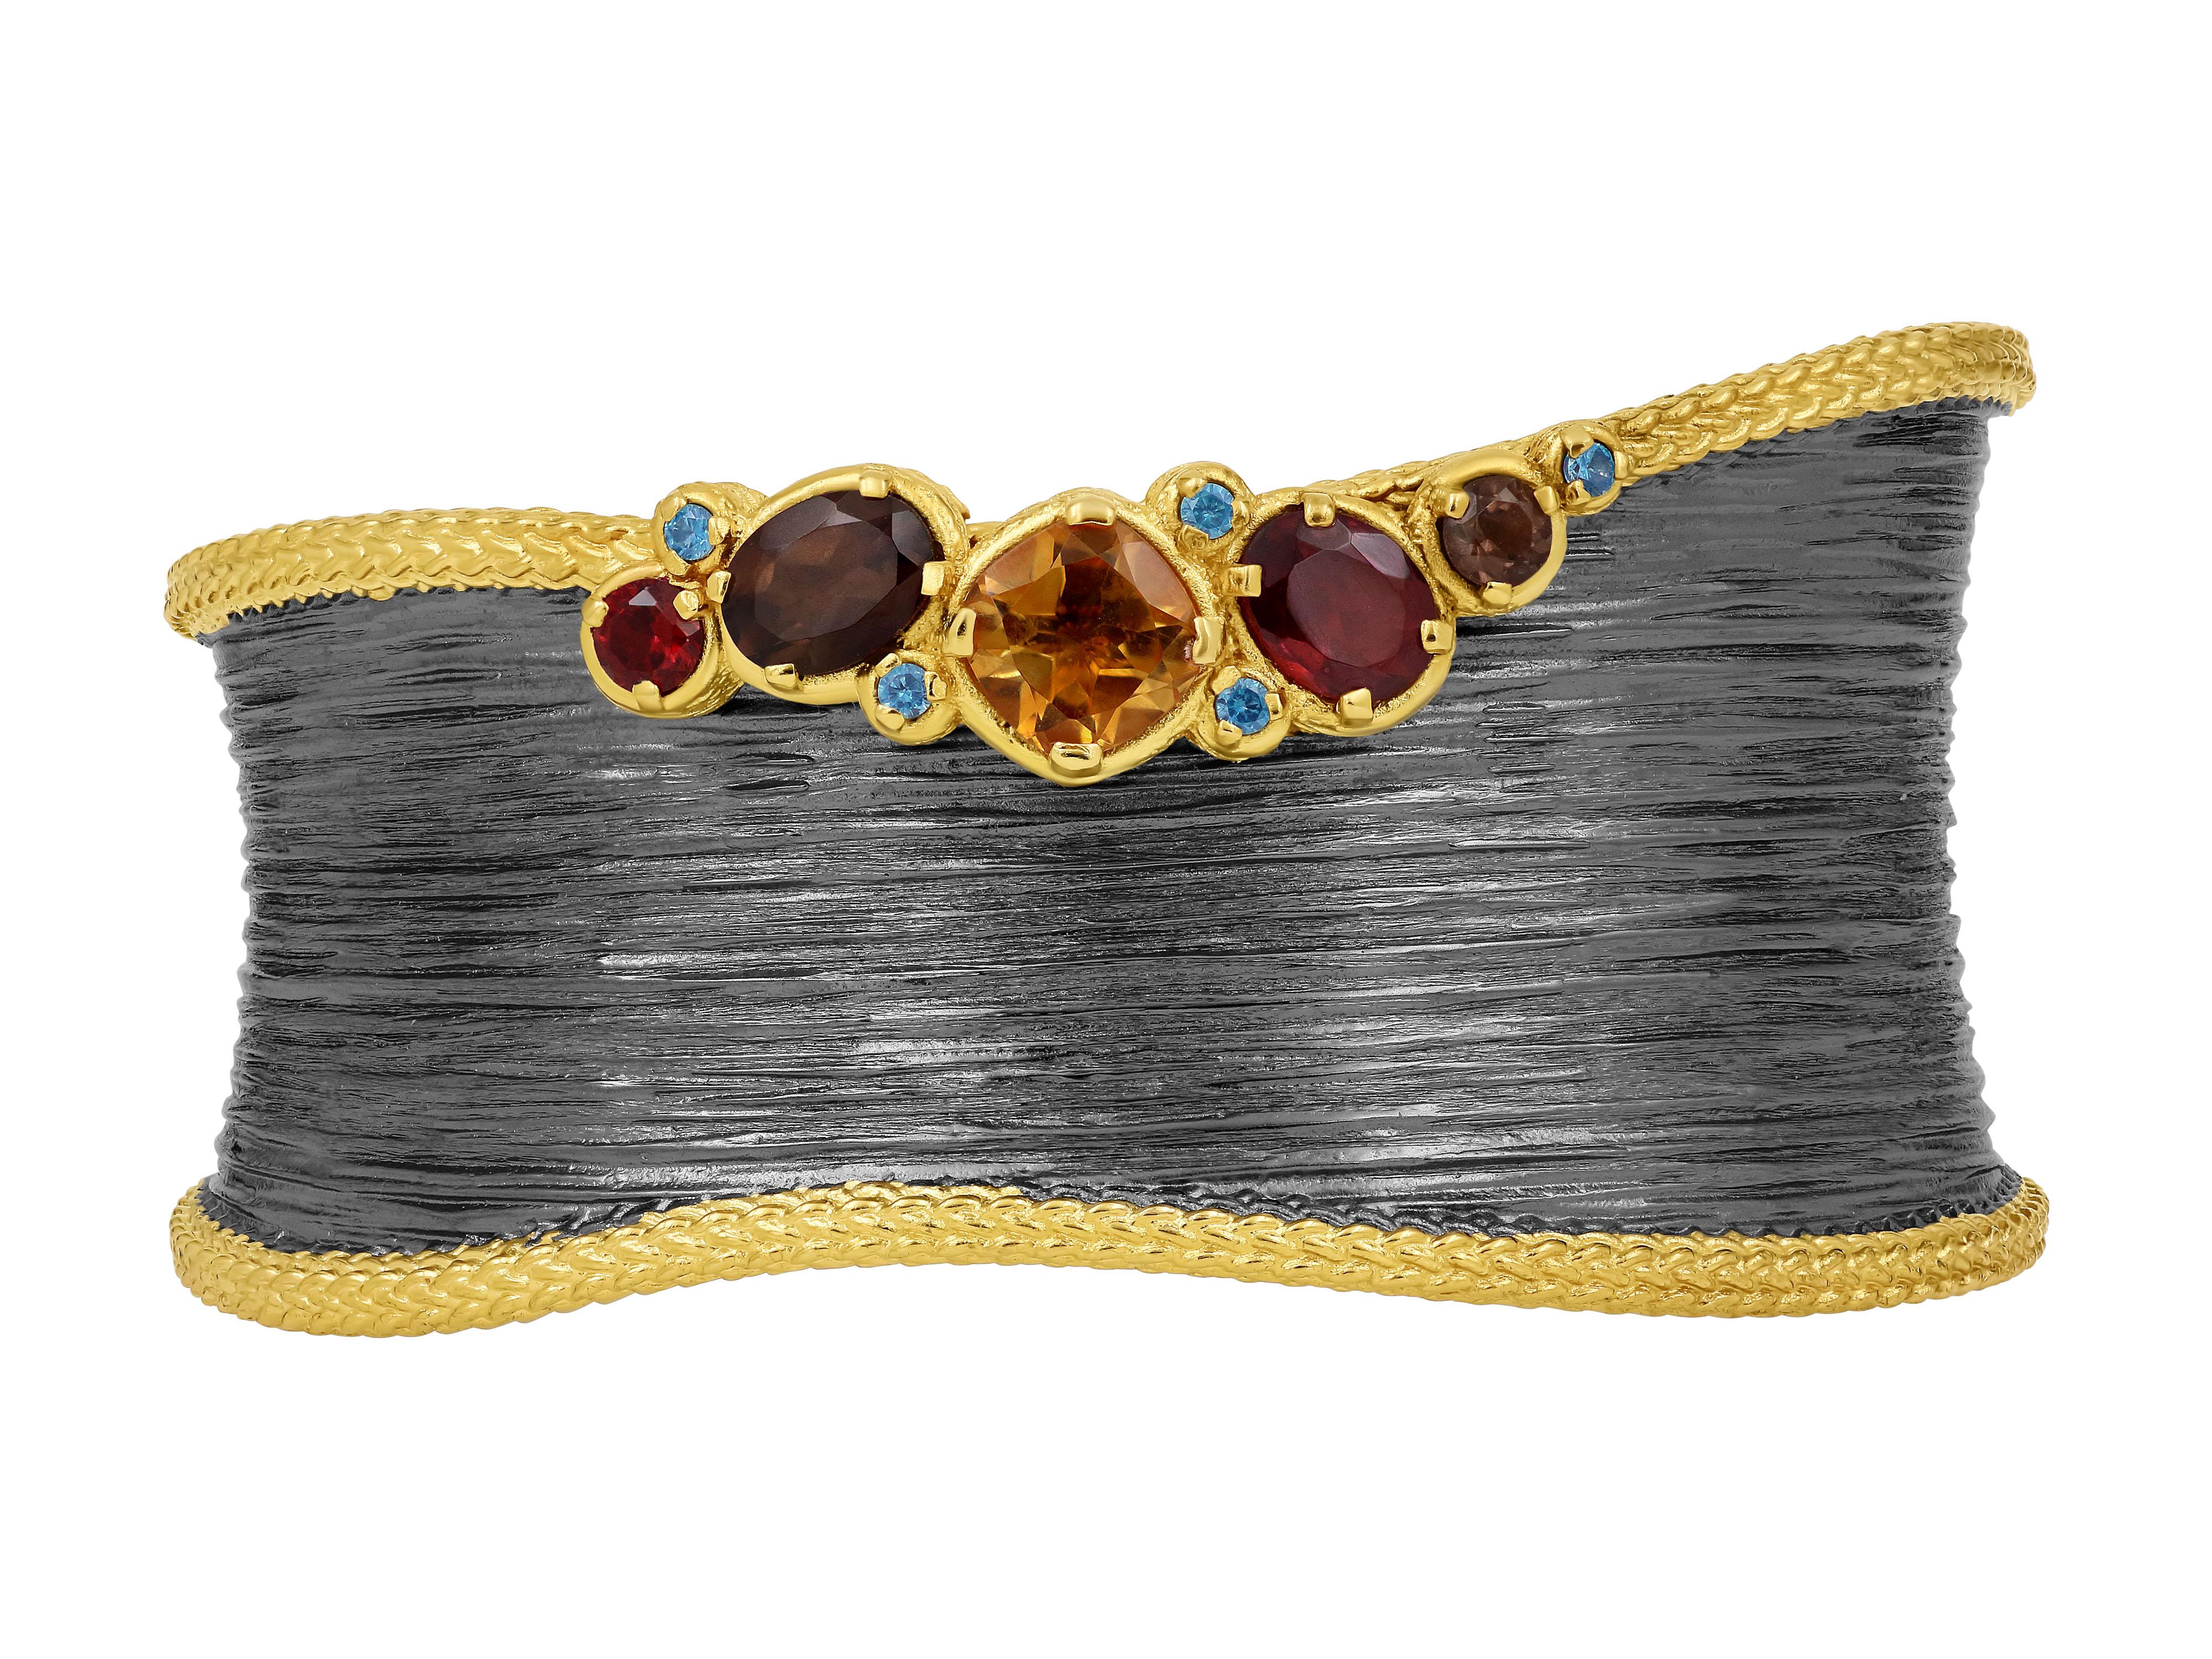 A powerful hand crafted cuff with a wonderful line texture set with citrine, smoke, blue topaz and garnets. The combination of these gemstones creates a stunning contrast, captivating the eye with its intricate and colorful design. This cuff is a